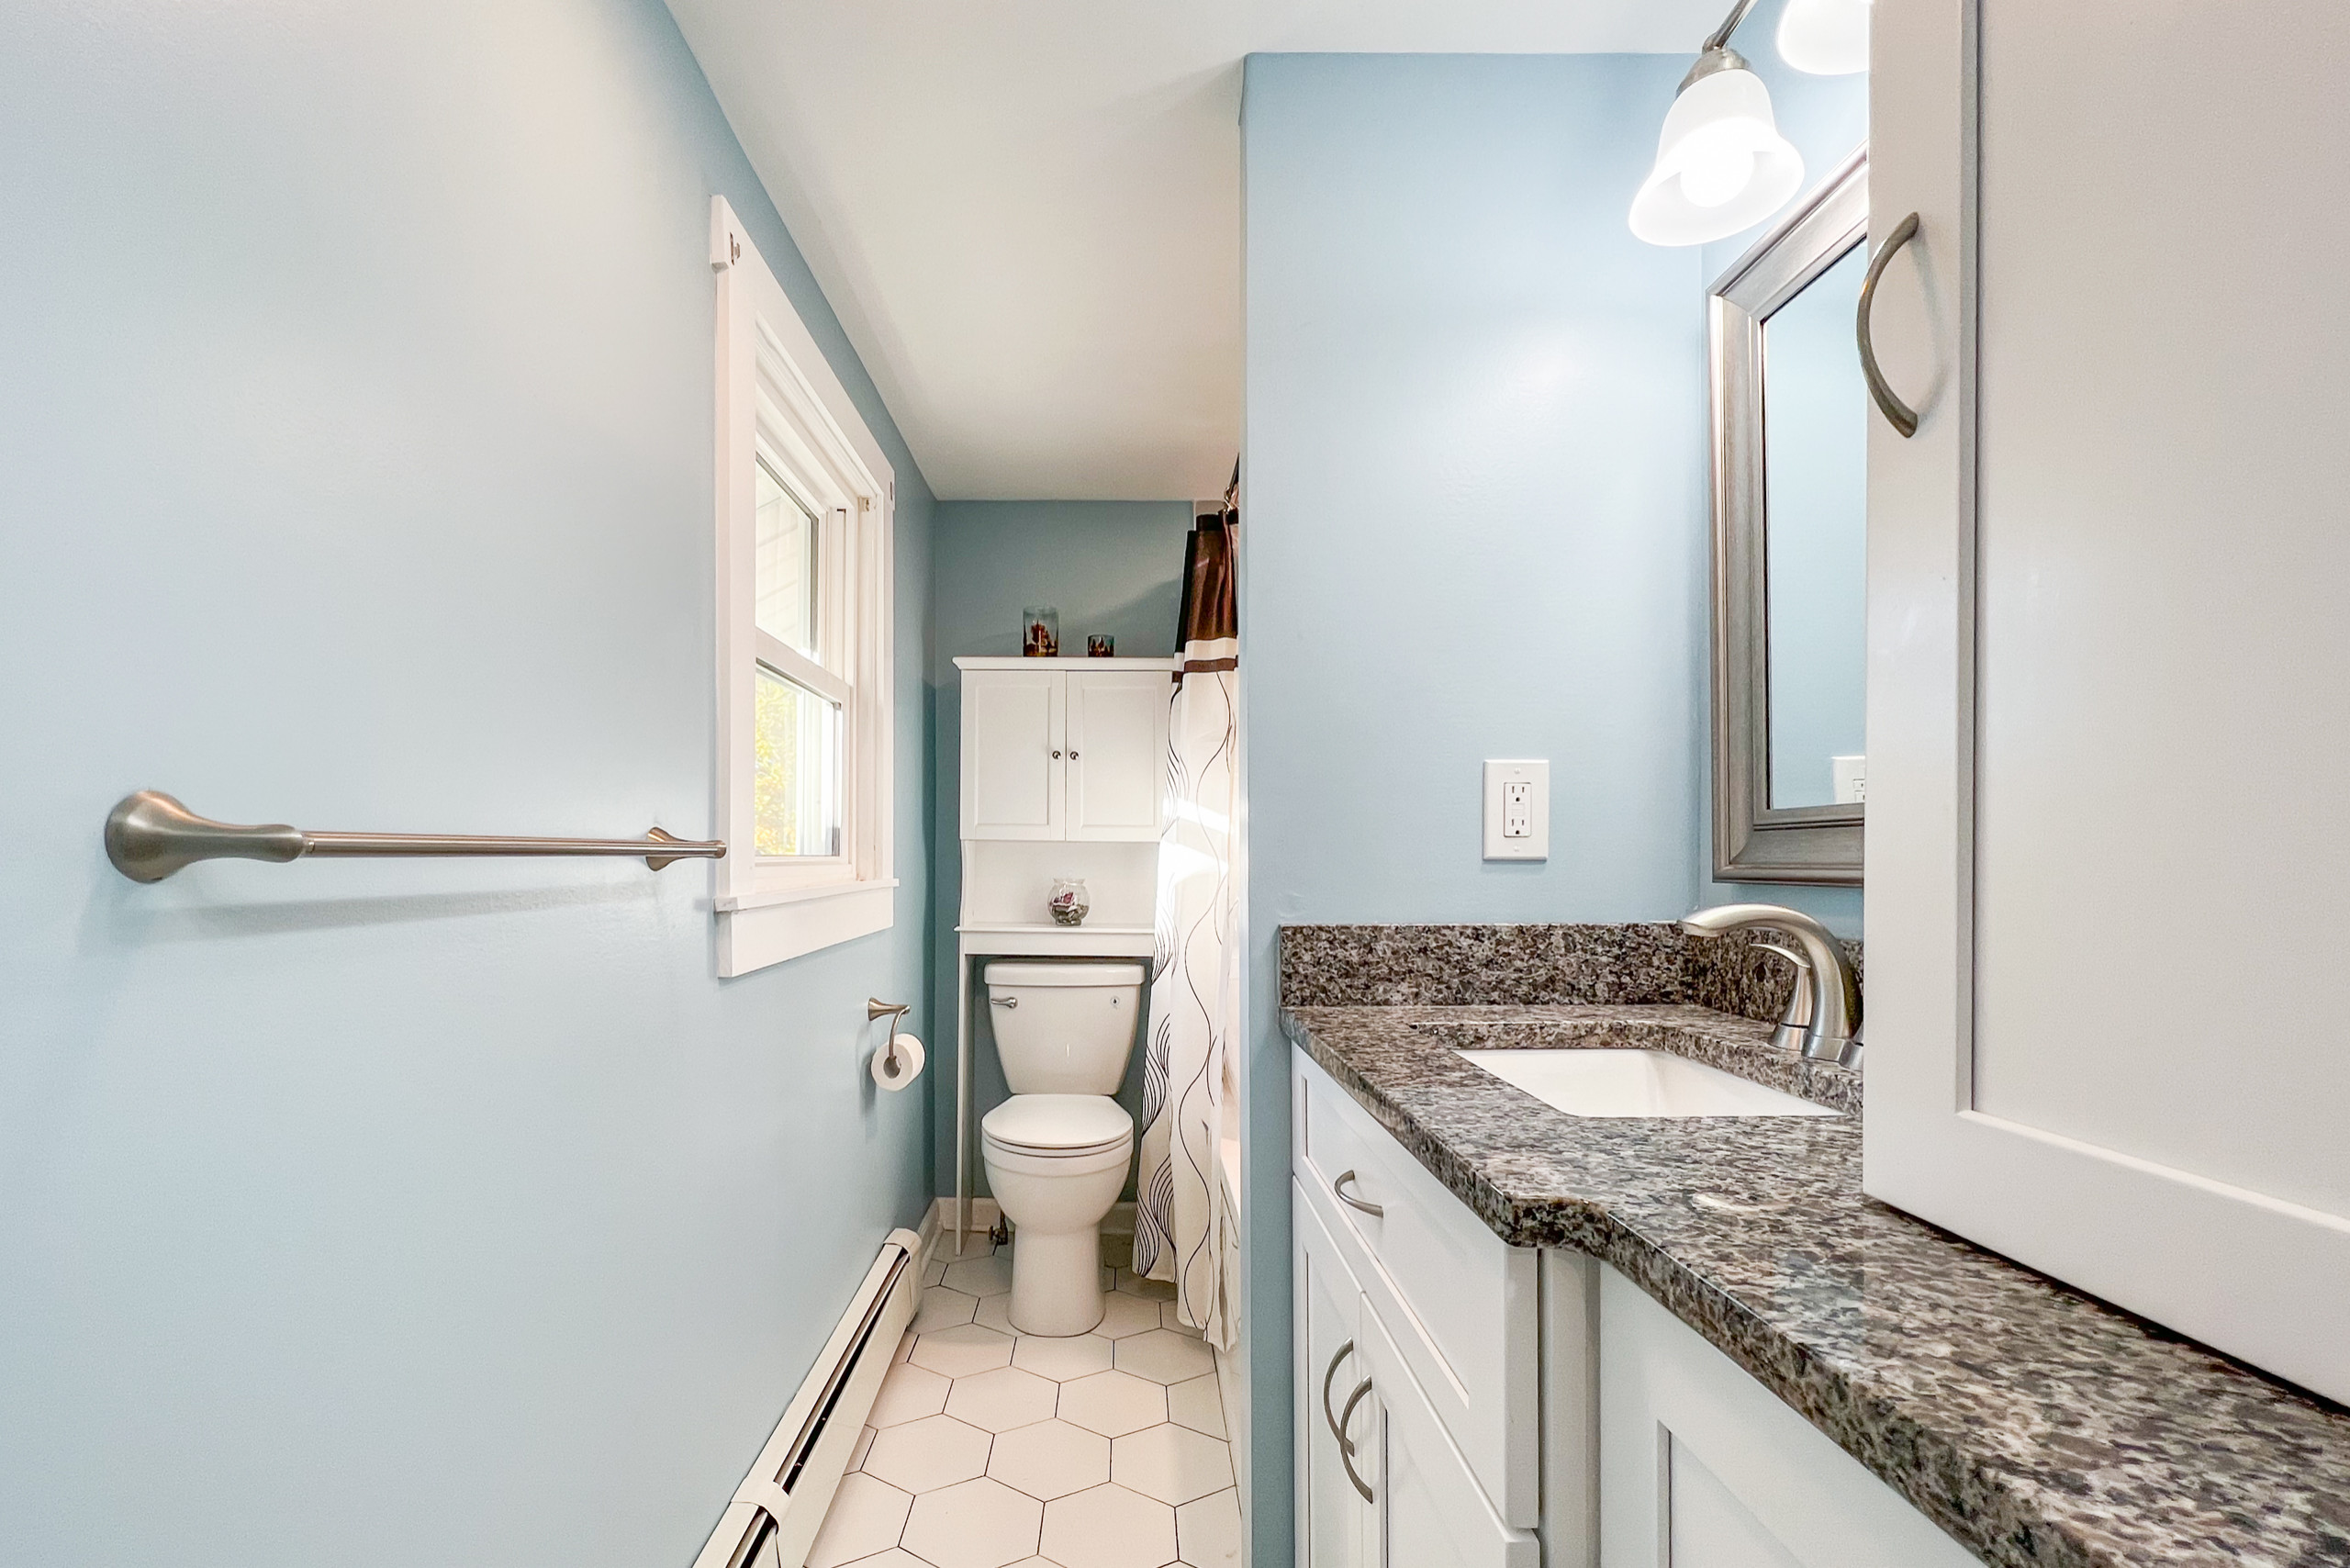 Featured Projects - Bathroom Renovation in Branchburg